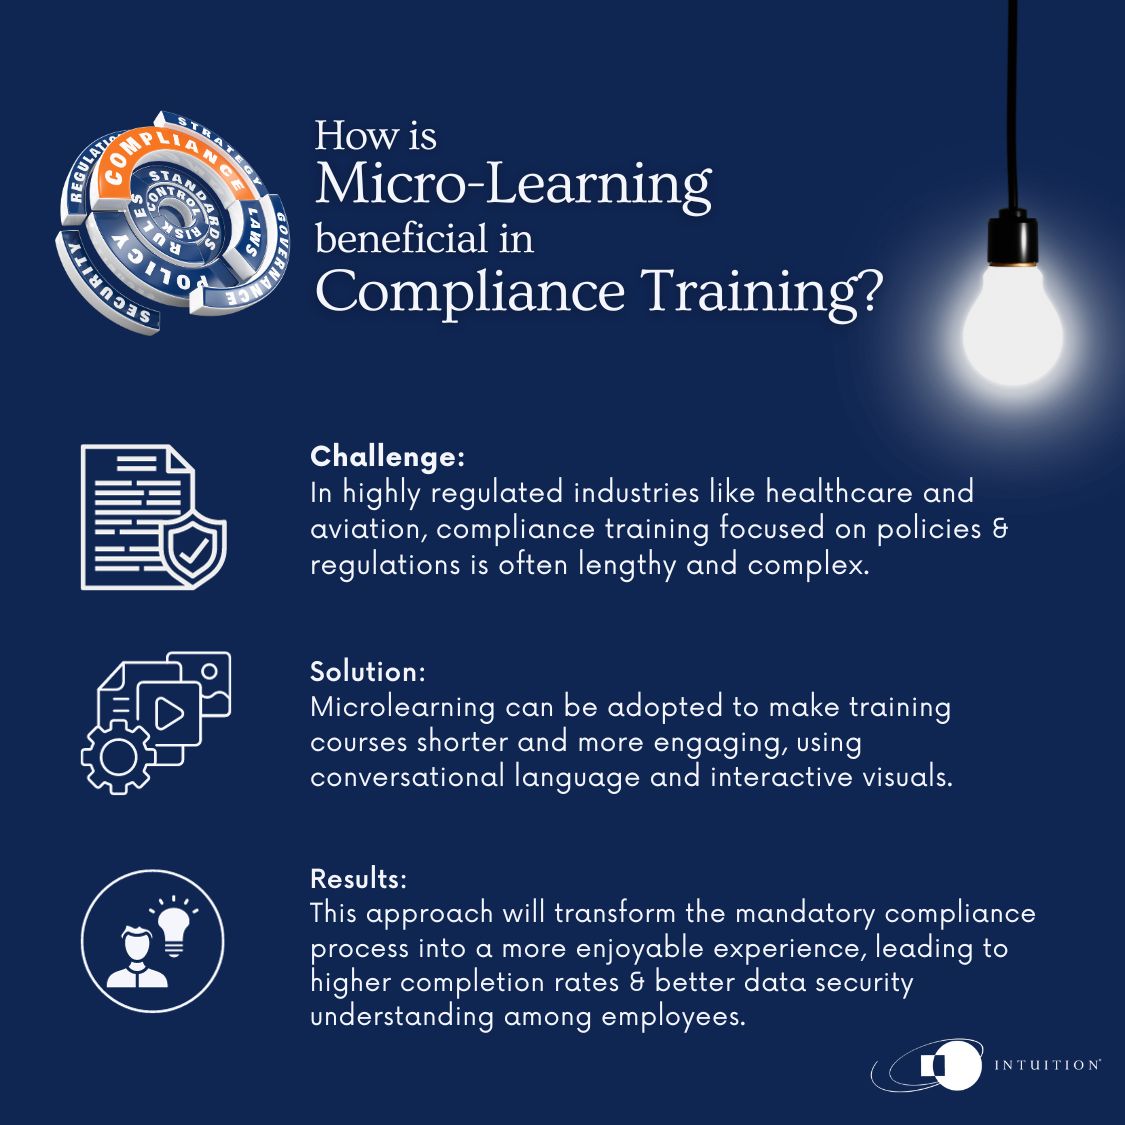 Micro-learning in compliance training